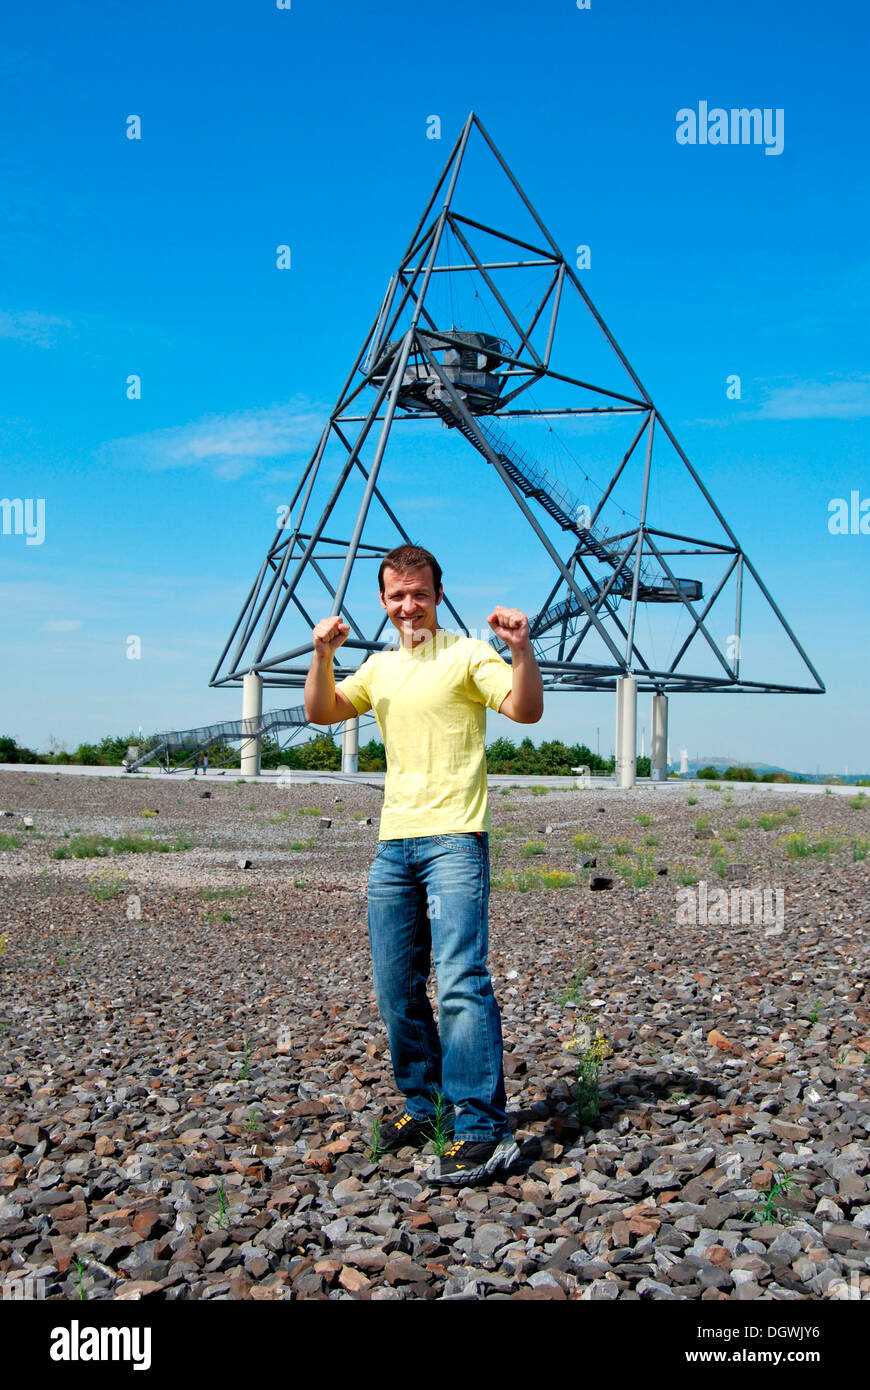 Young man standing in front of the Tetraeder landmark, a tetrahedron made from steel, industrial heritage Stock Photo